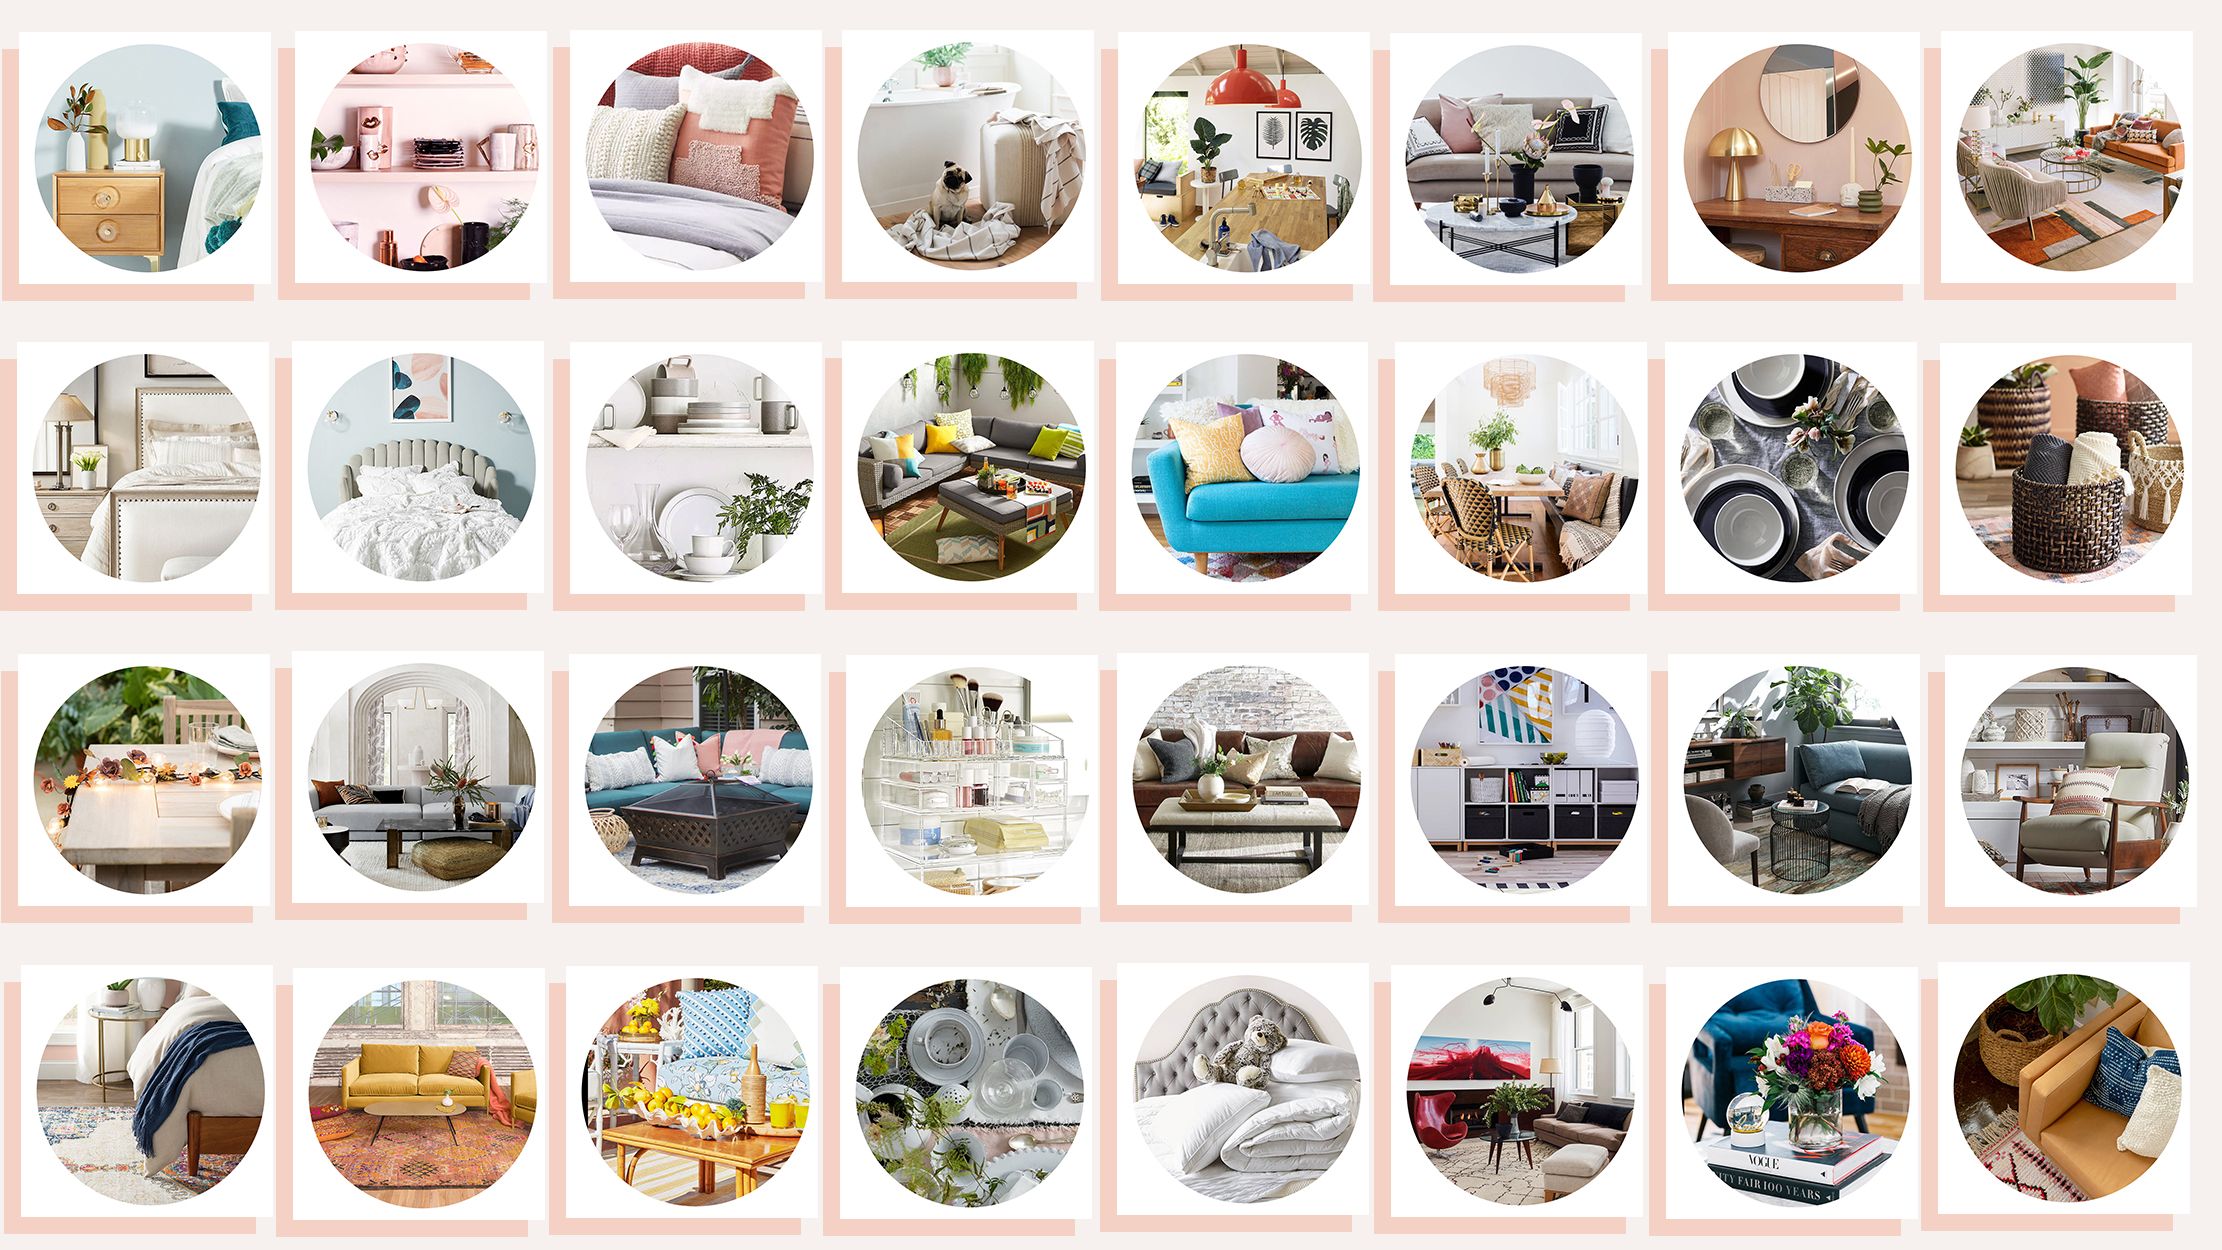 20 Best Home Decoration Stores: Reviews and Recommendations in